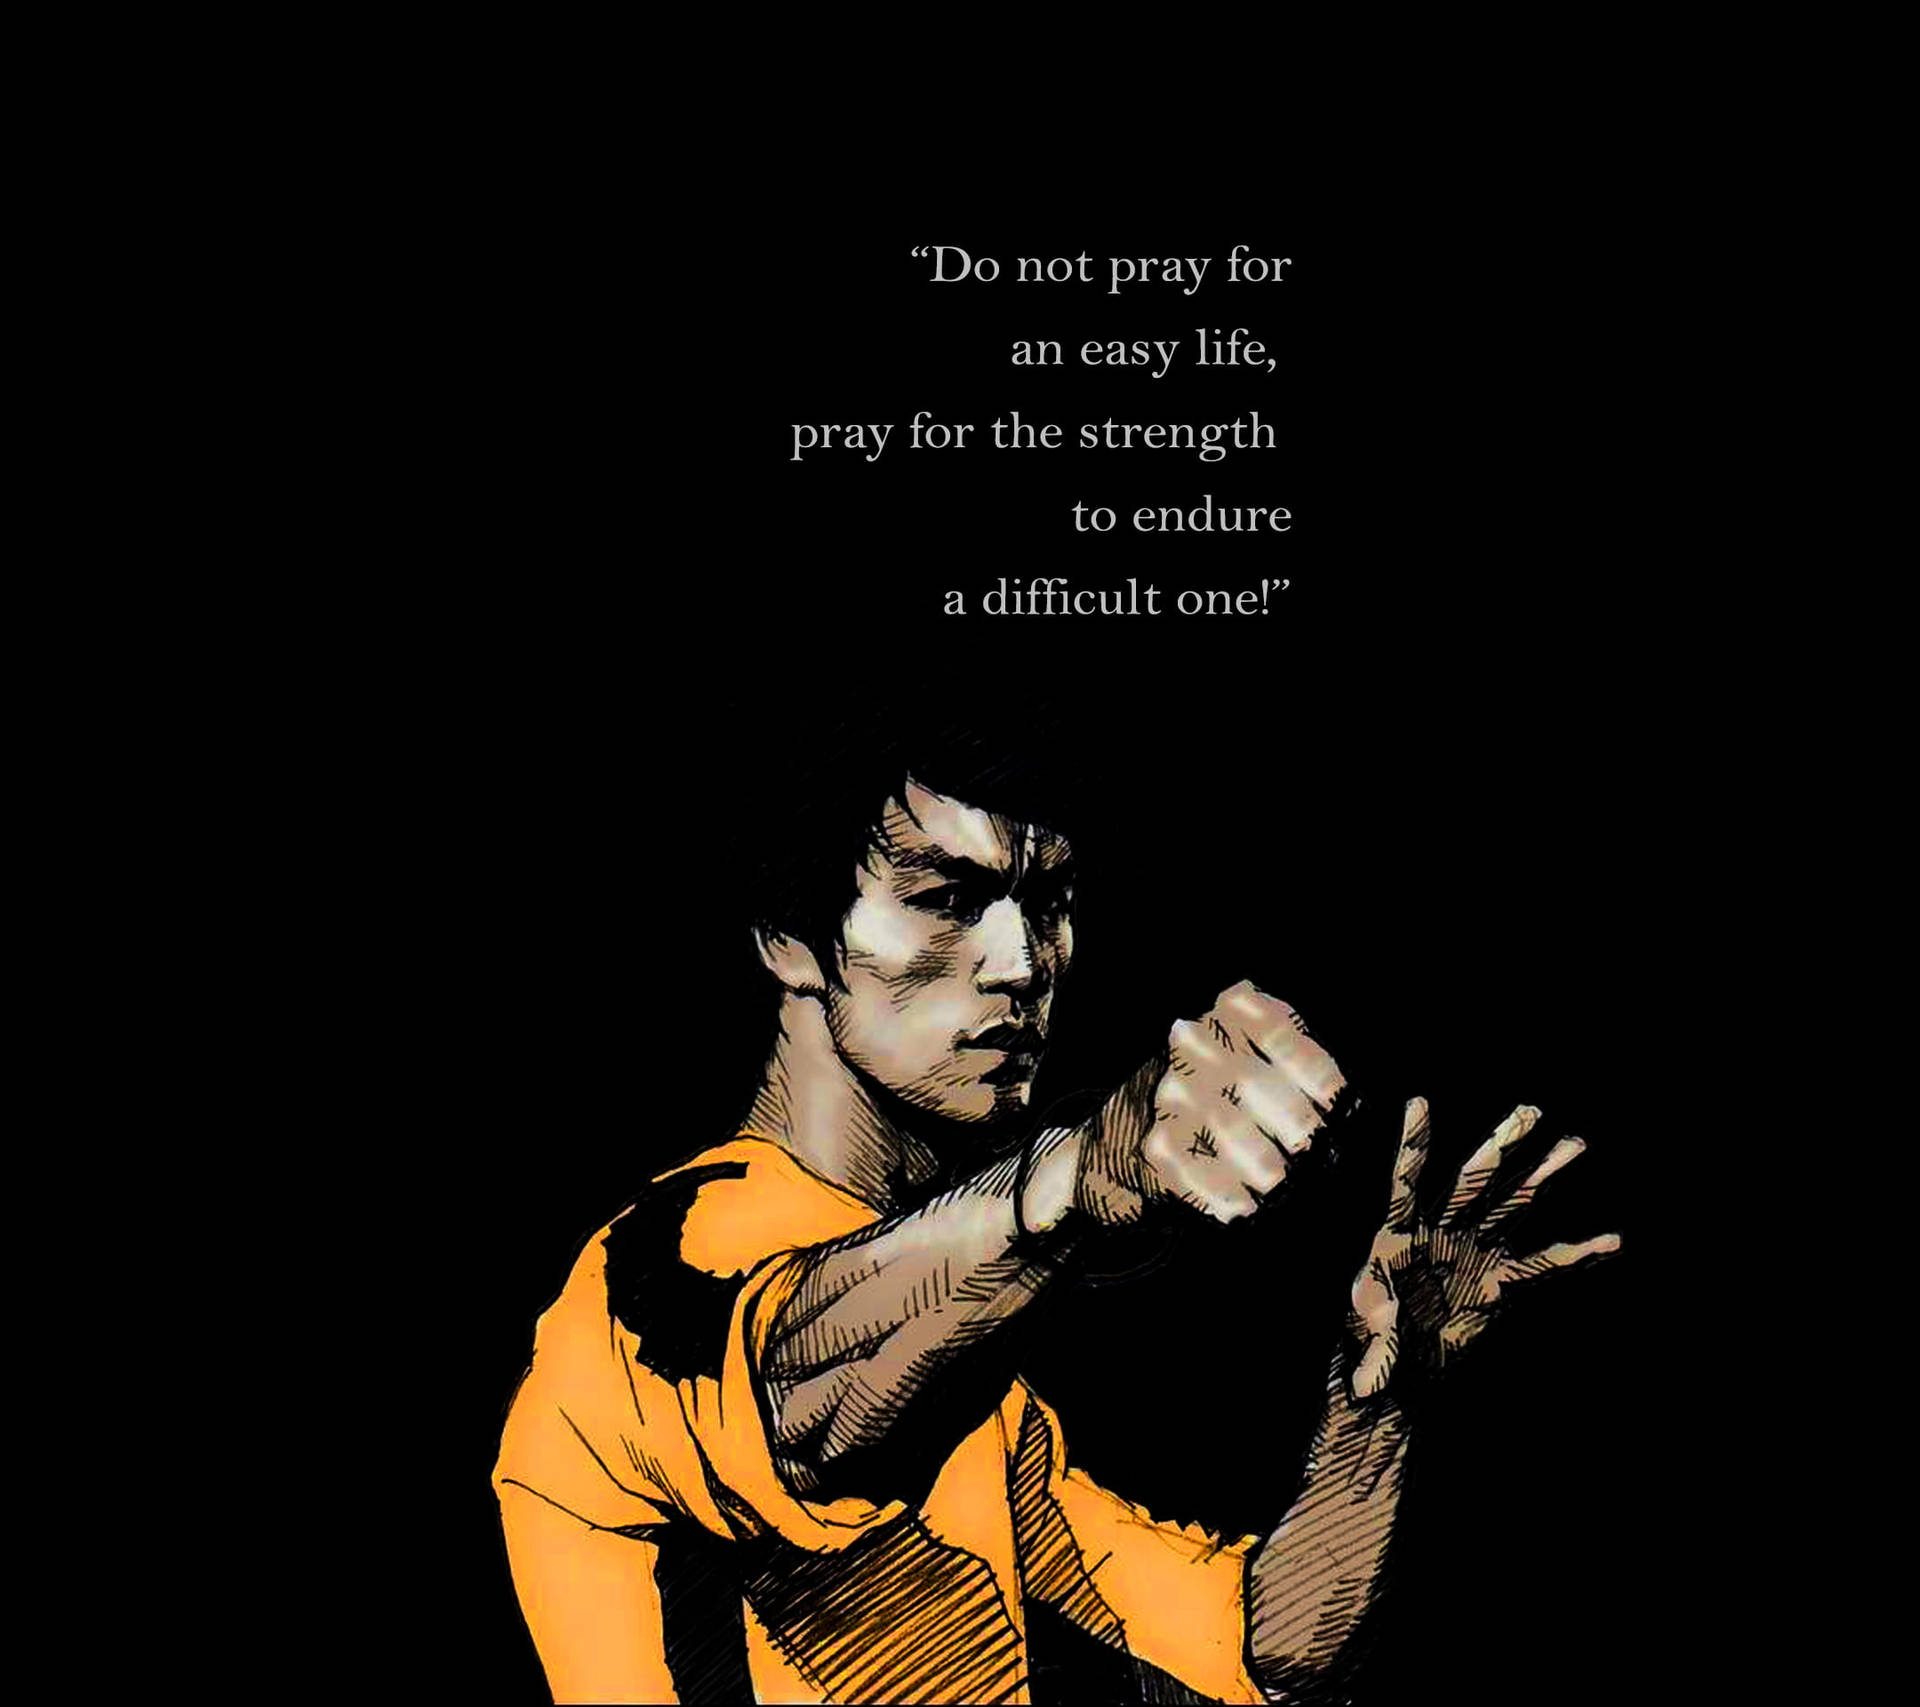 Bruce Lee Wing Chun Fighting Art Picture